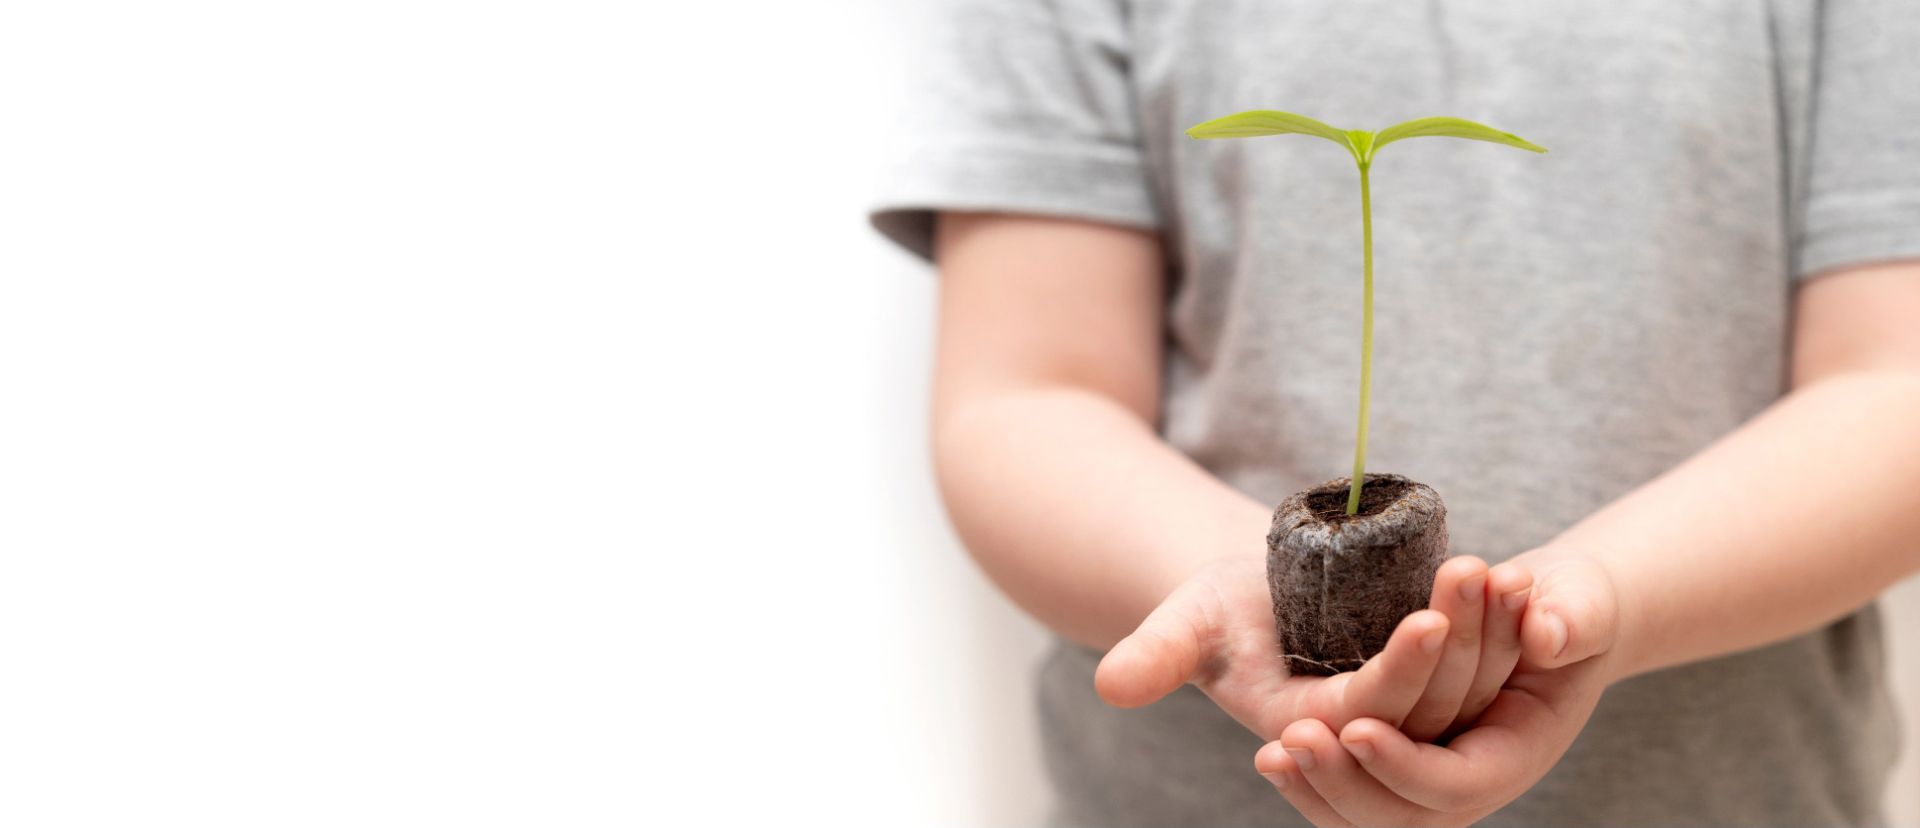 Child holding small sprouting plant in their hands